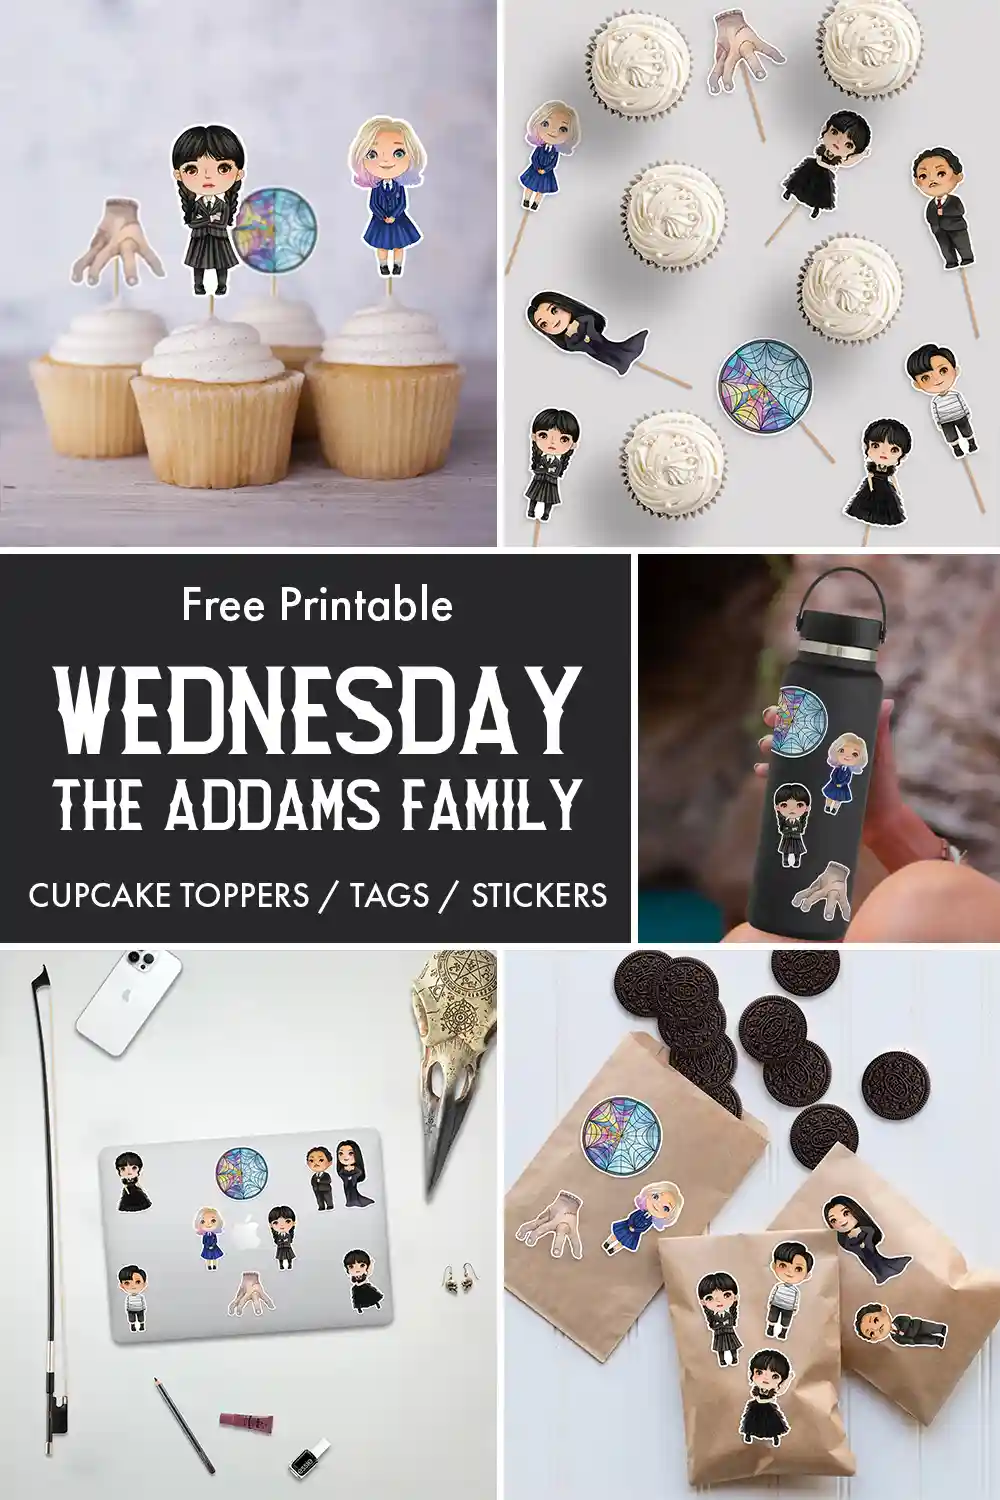 Free Wednesday Addams Family Cupcake Toppers or Stickers